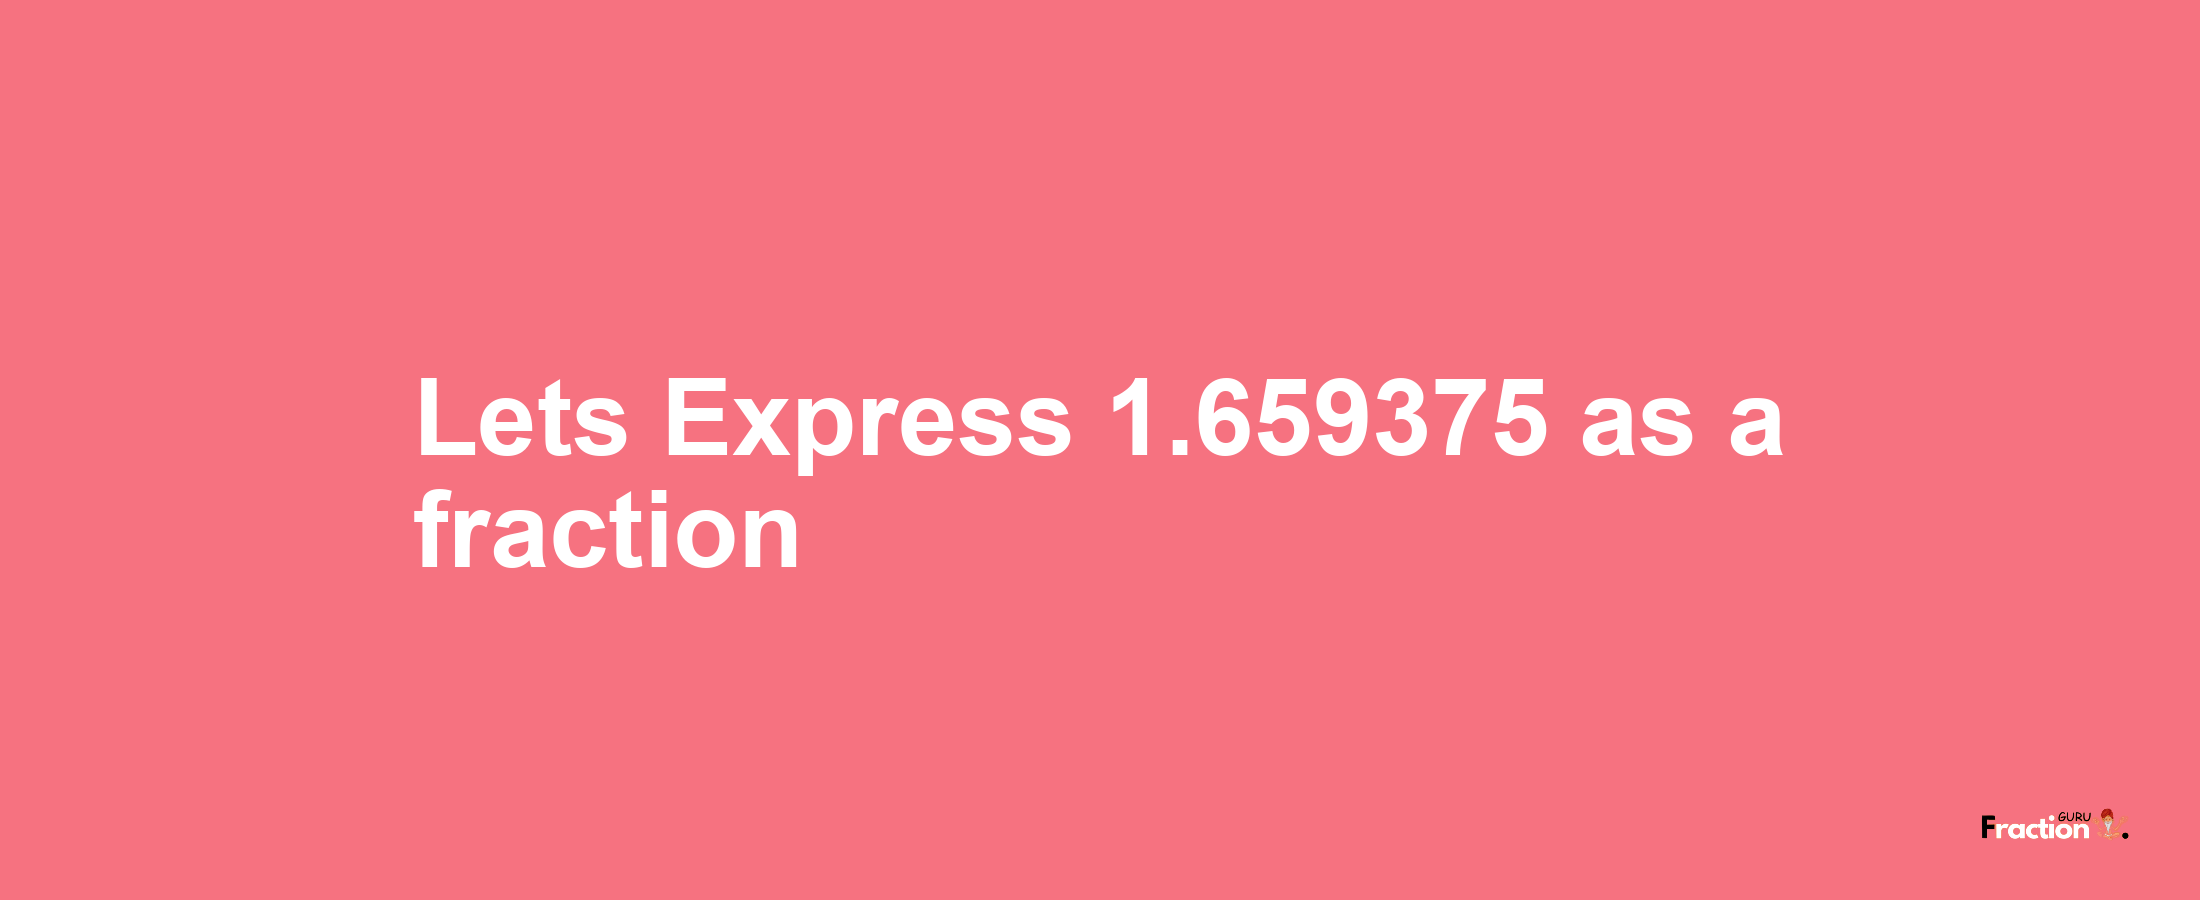 Lets Express 1.659375 as afraction